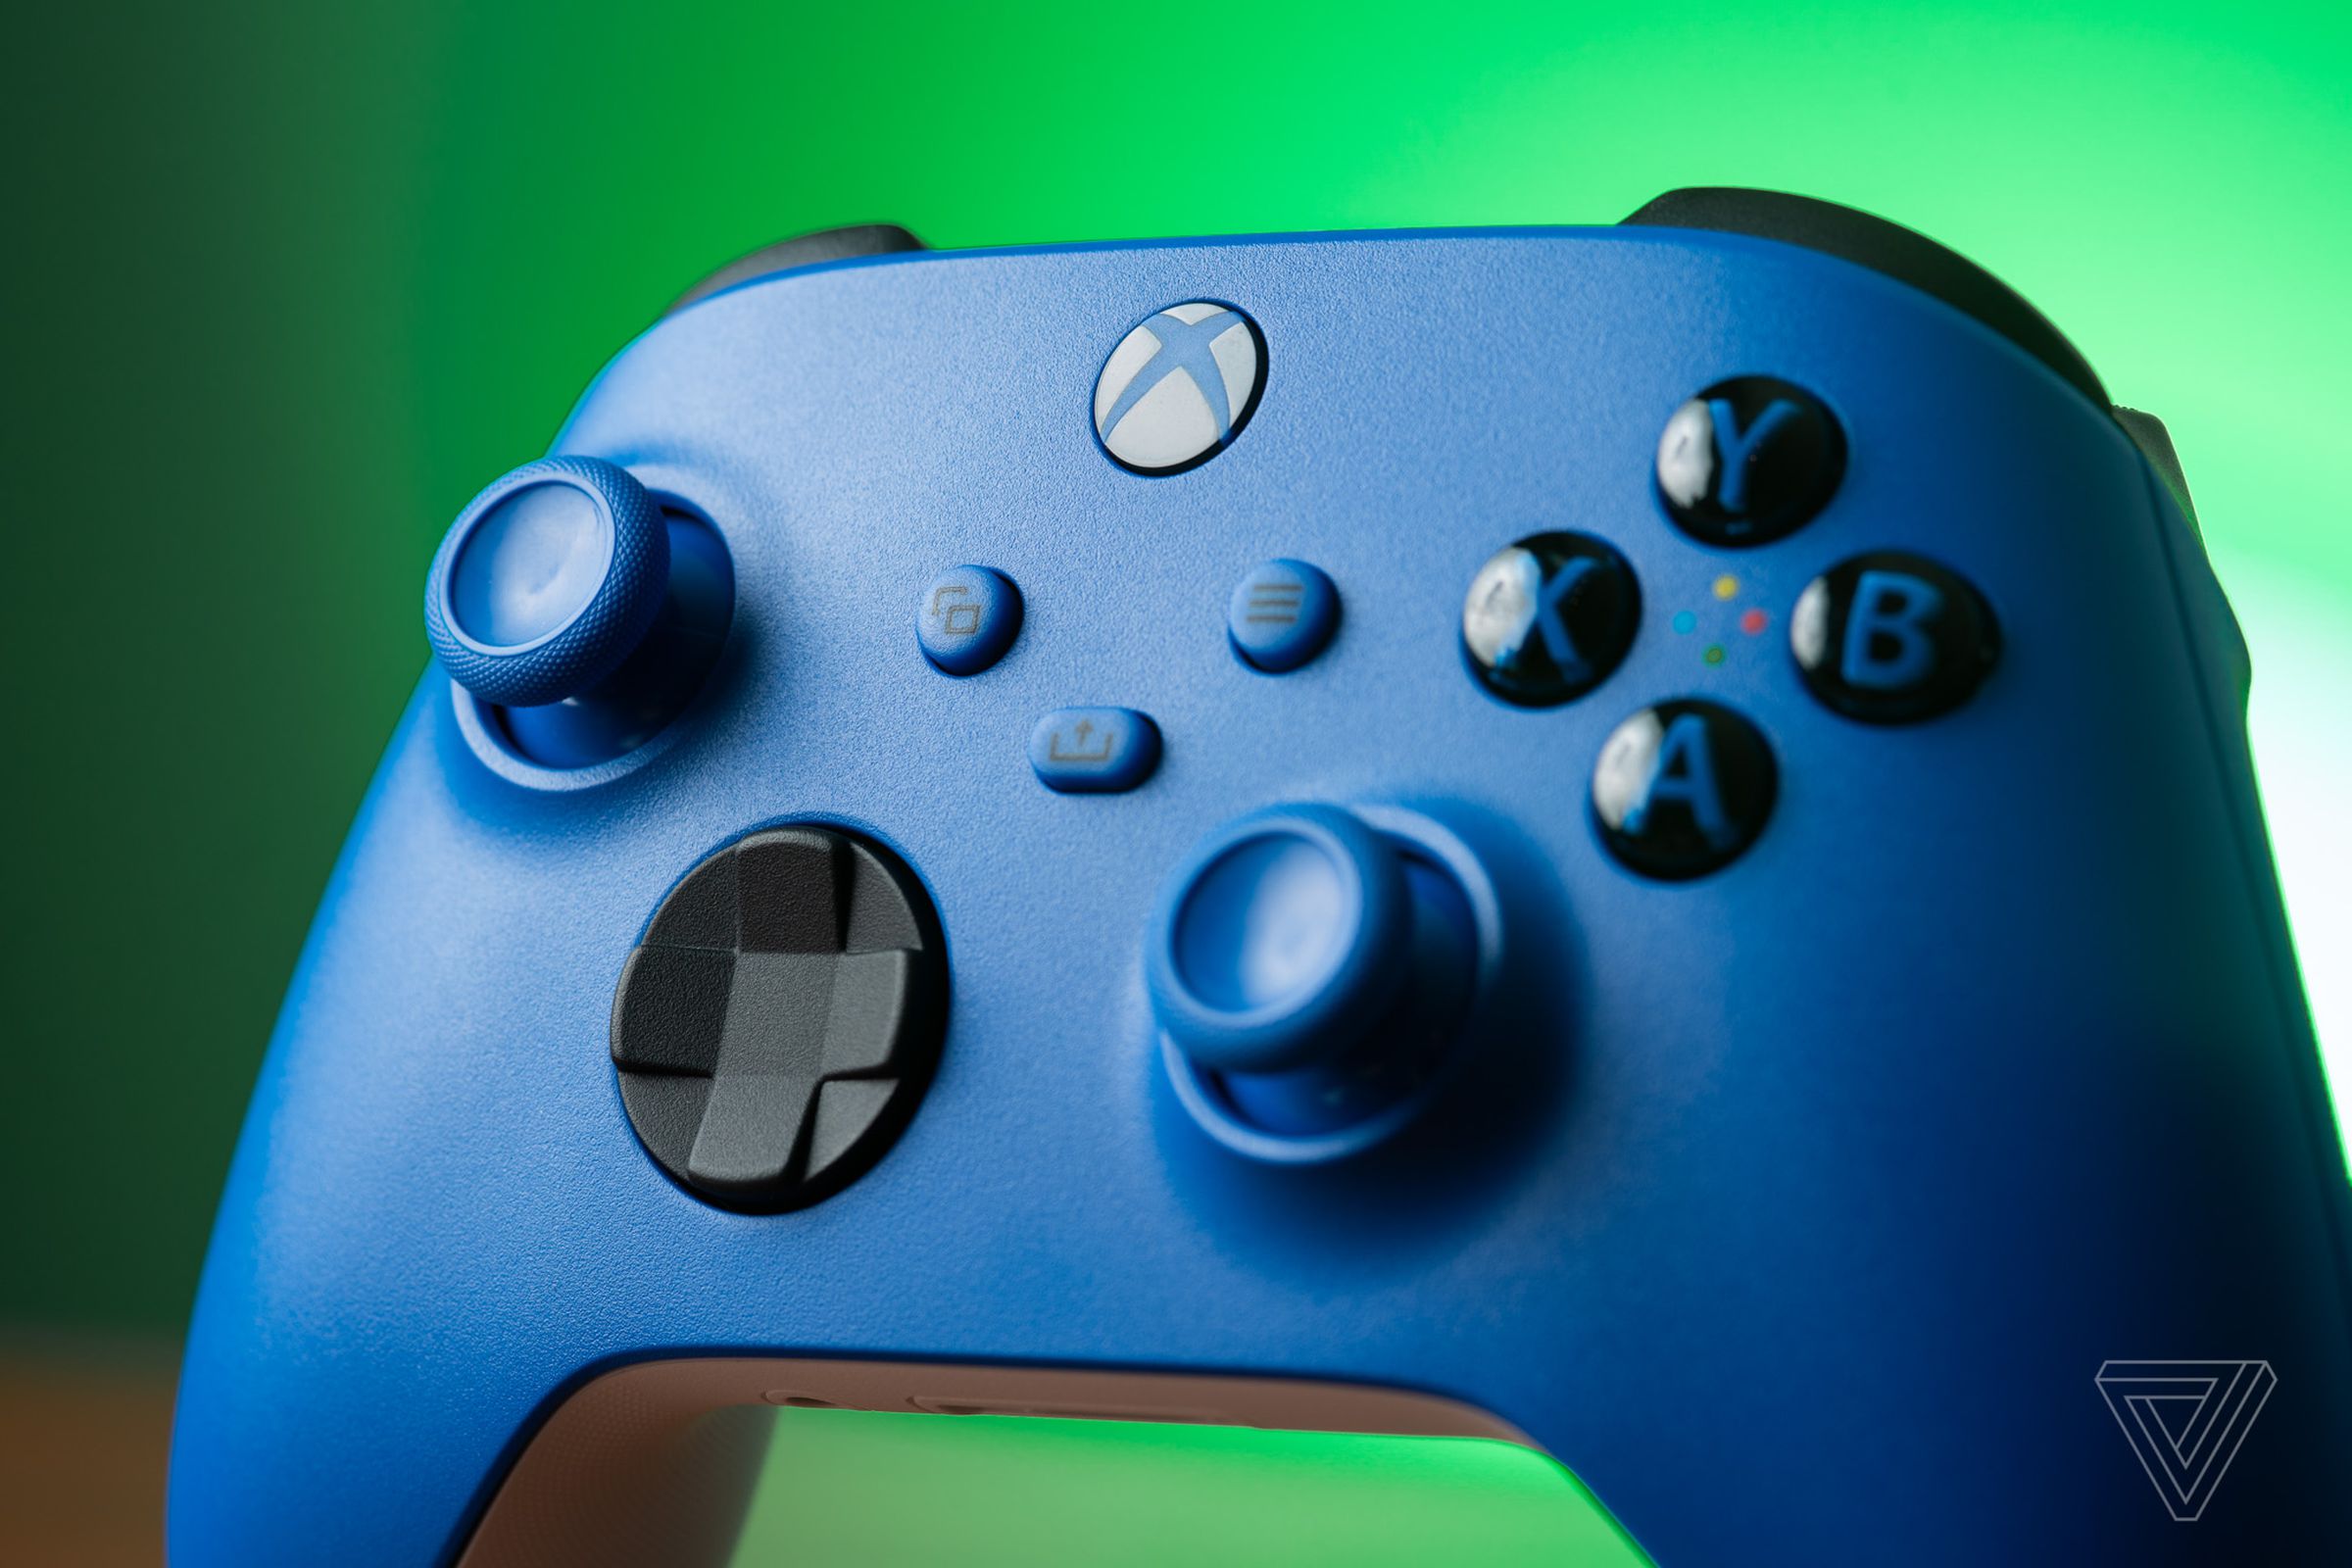 You can get Microsoft’s wireless Xbox controller in several colors at Target.